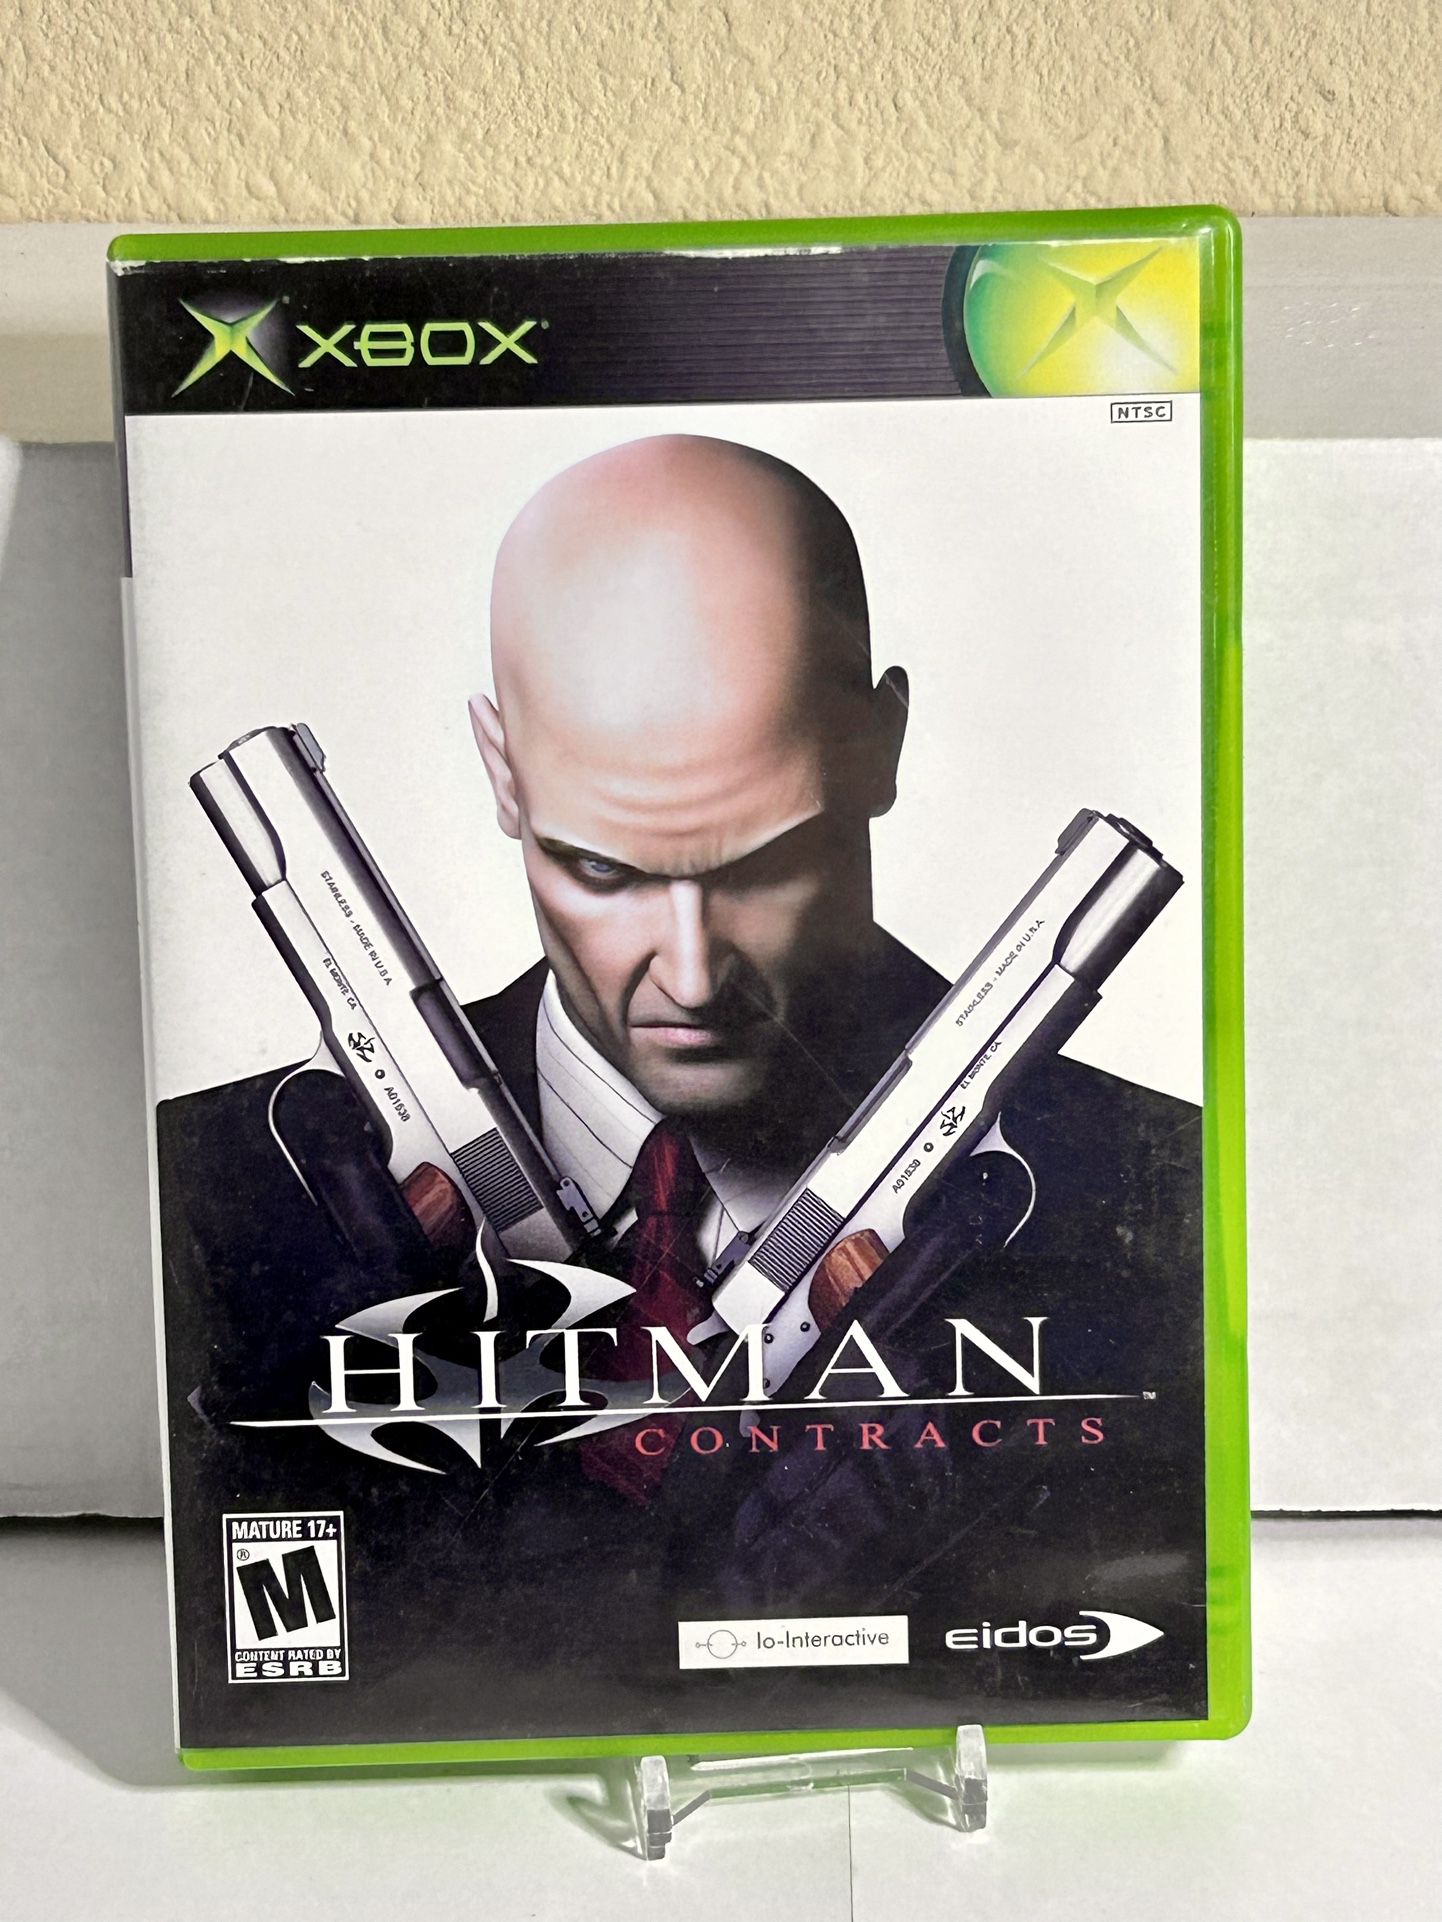 Hitman Contracts Original Xbox Video Game Complete With Manual (2004)